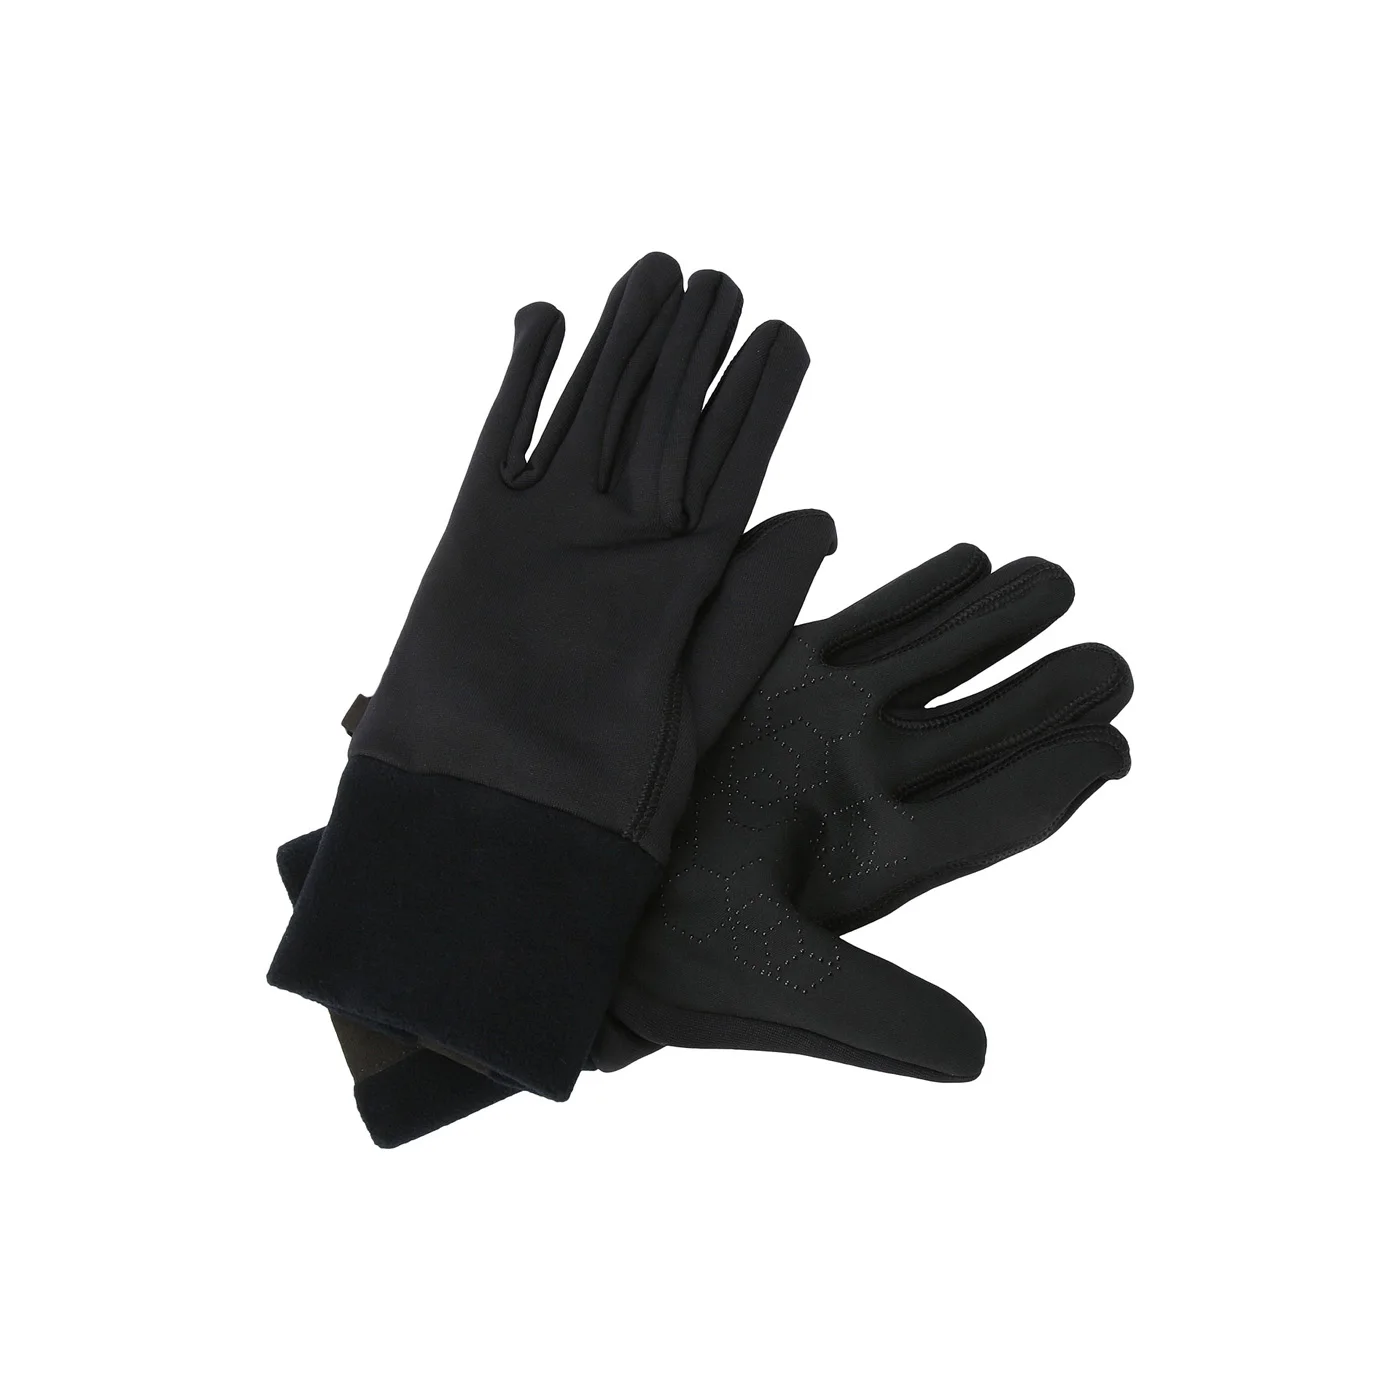 Ansell Edge Palm Pu Coating 48-126 Gloves,Ansell Gloves - Buy Ansell ...